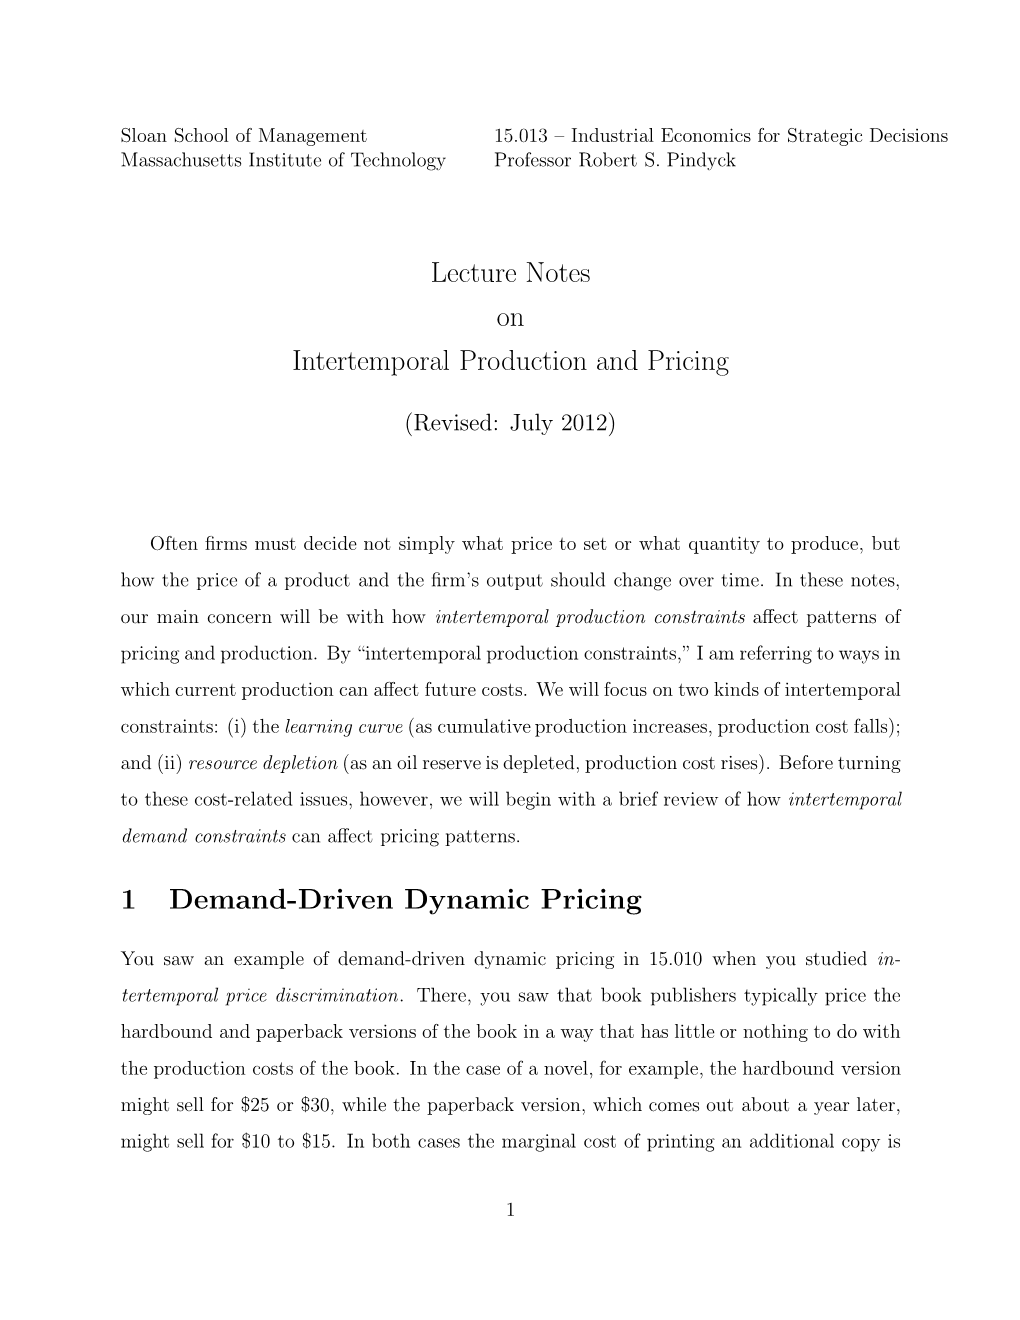 Intertemporal Production and Pricing